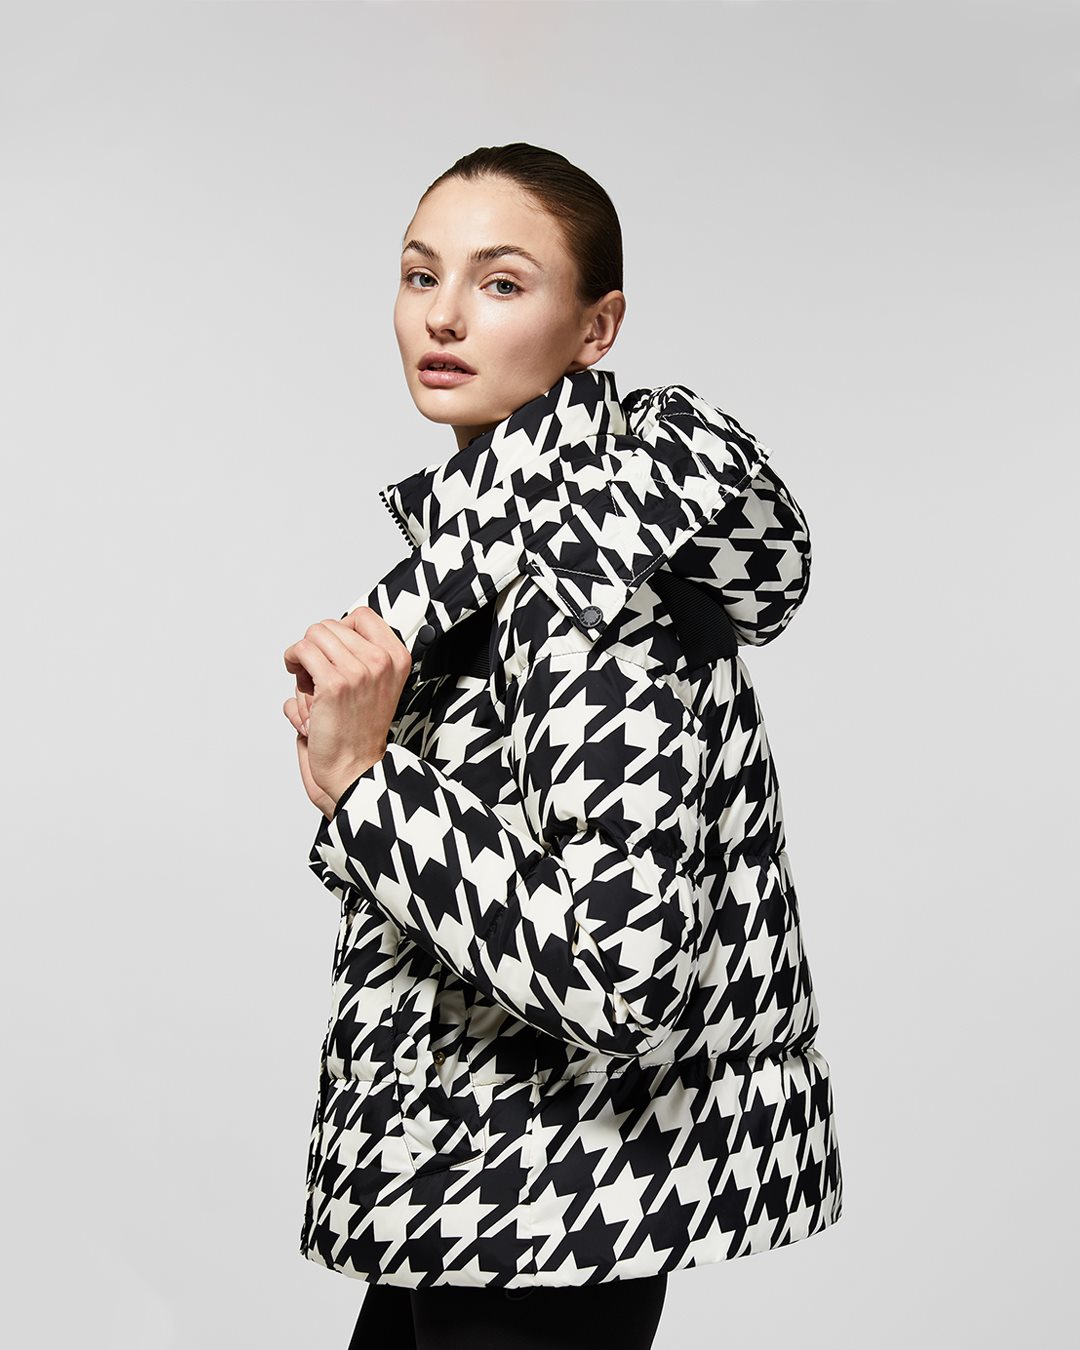 The magic of iconic 60s style is unveiled in a dazzling display pf houndstooth prints and cool colour-blocking to master sub-zero dressing.